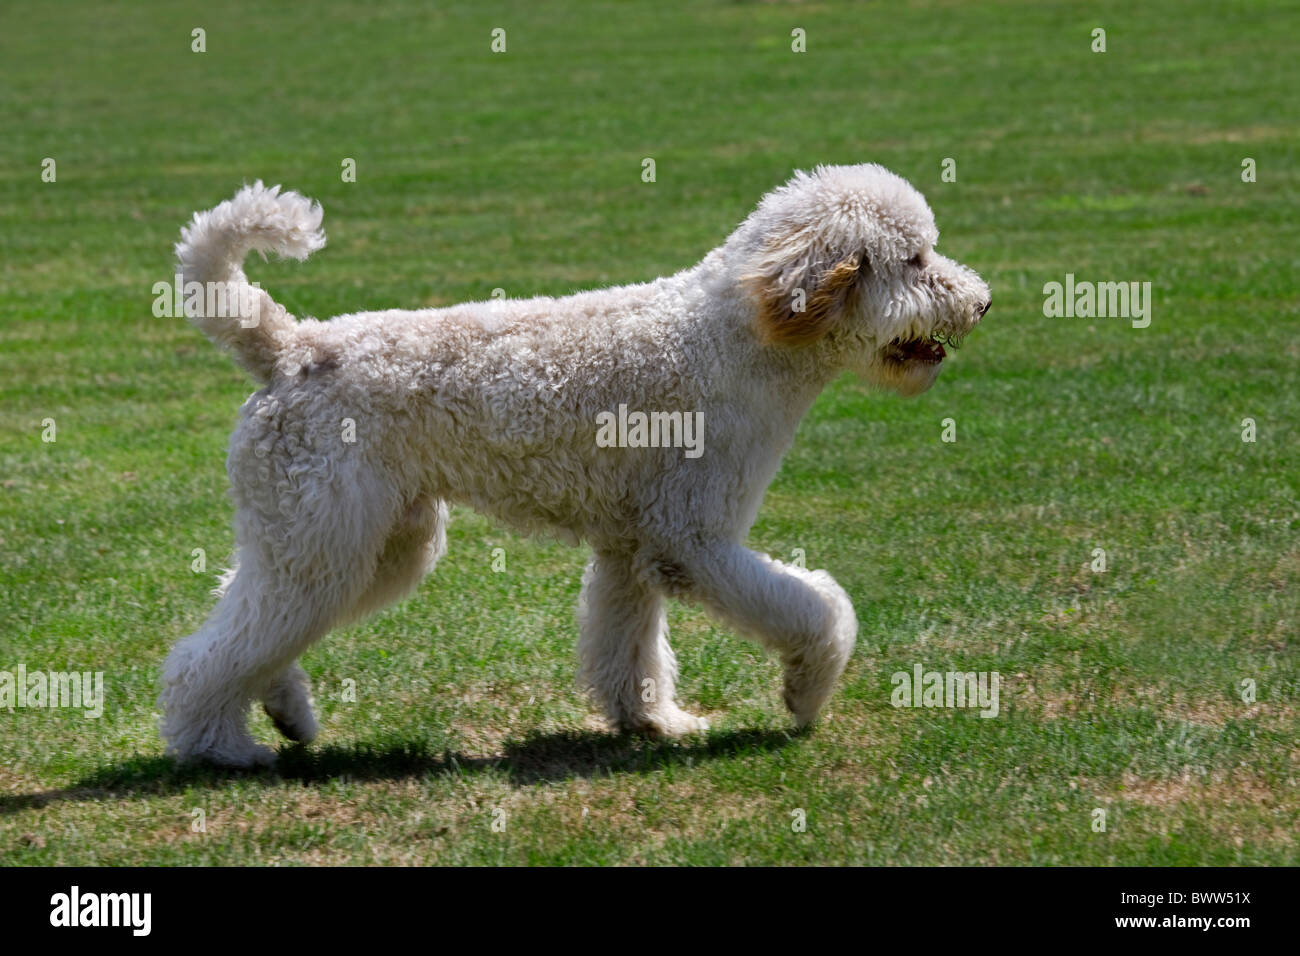 Caniche royal (Canis lupus familiaris) in garden Banque D'Images